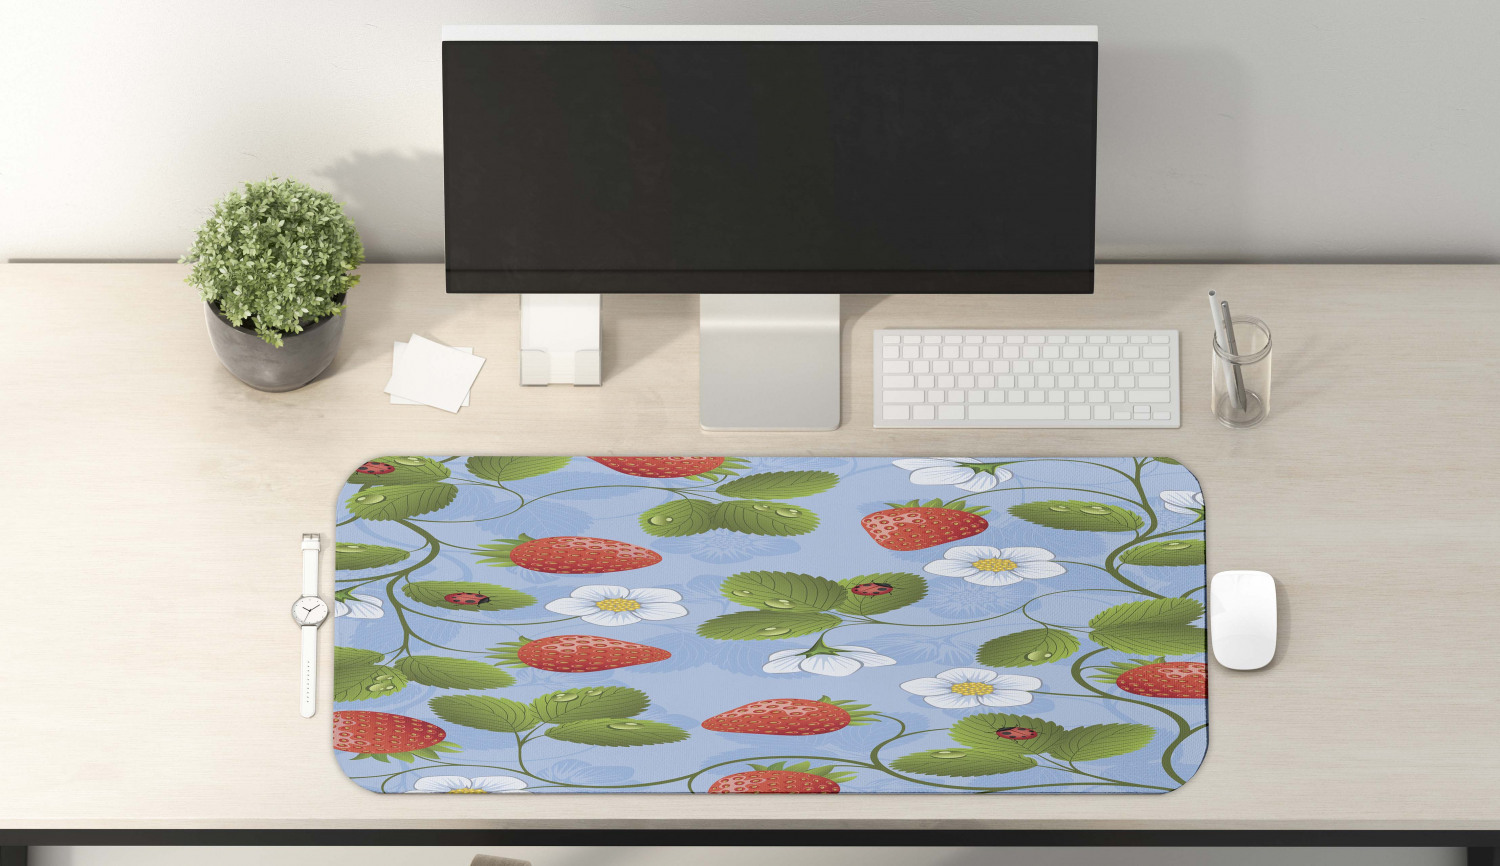 Ladybugs Computer Mouse Pad, Strawberries Daisies and Ladybugs Looks Like Ivy Plant Spotted Insects Image, Rectangle Non-Slip Rubber Mousepad Large, 31" x 12", Blue Green Red, by Ambesonne - image 2 of 2